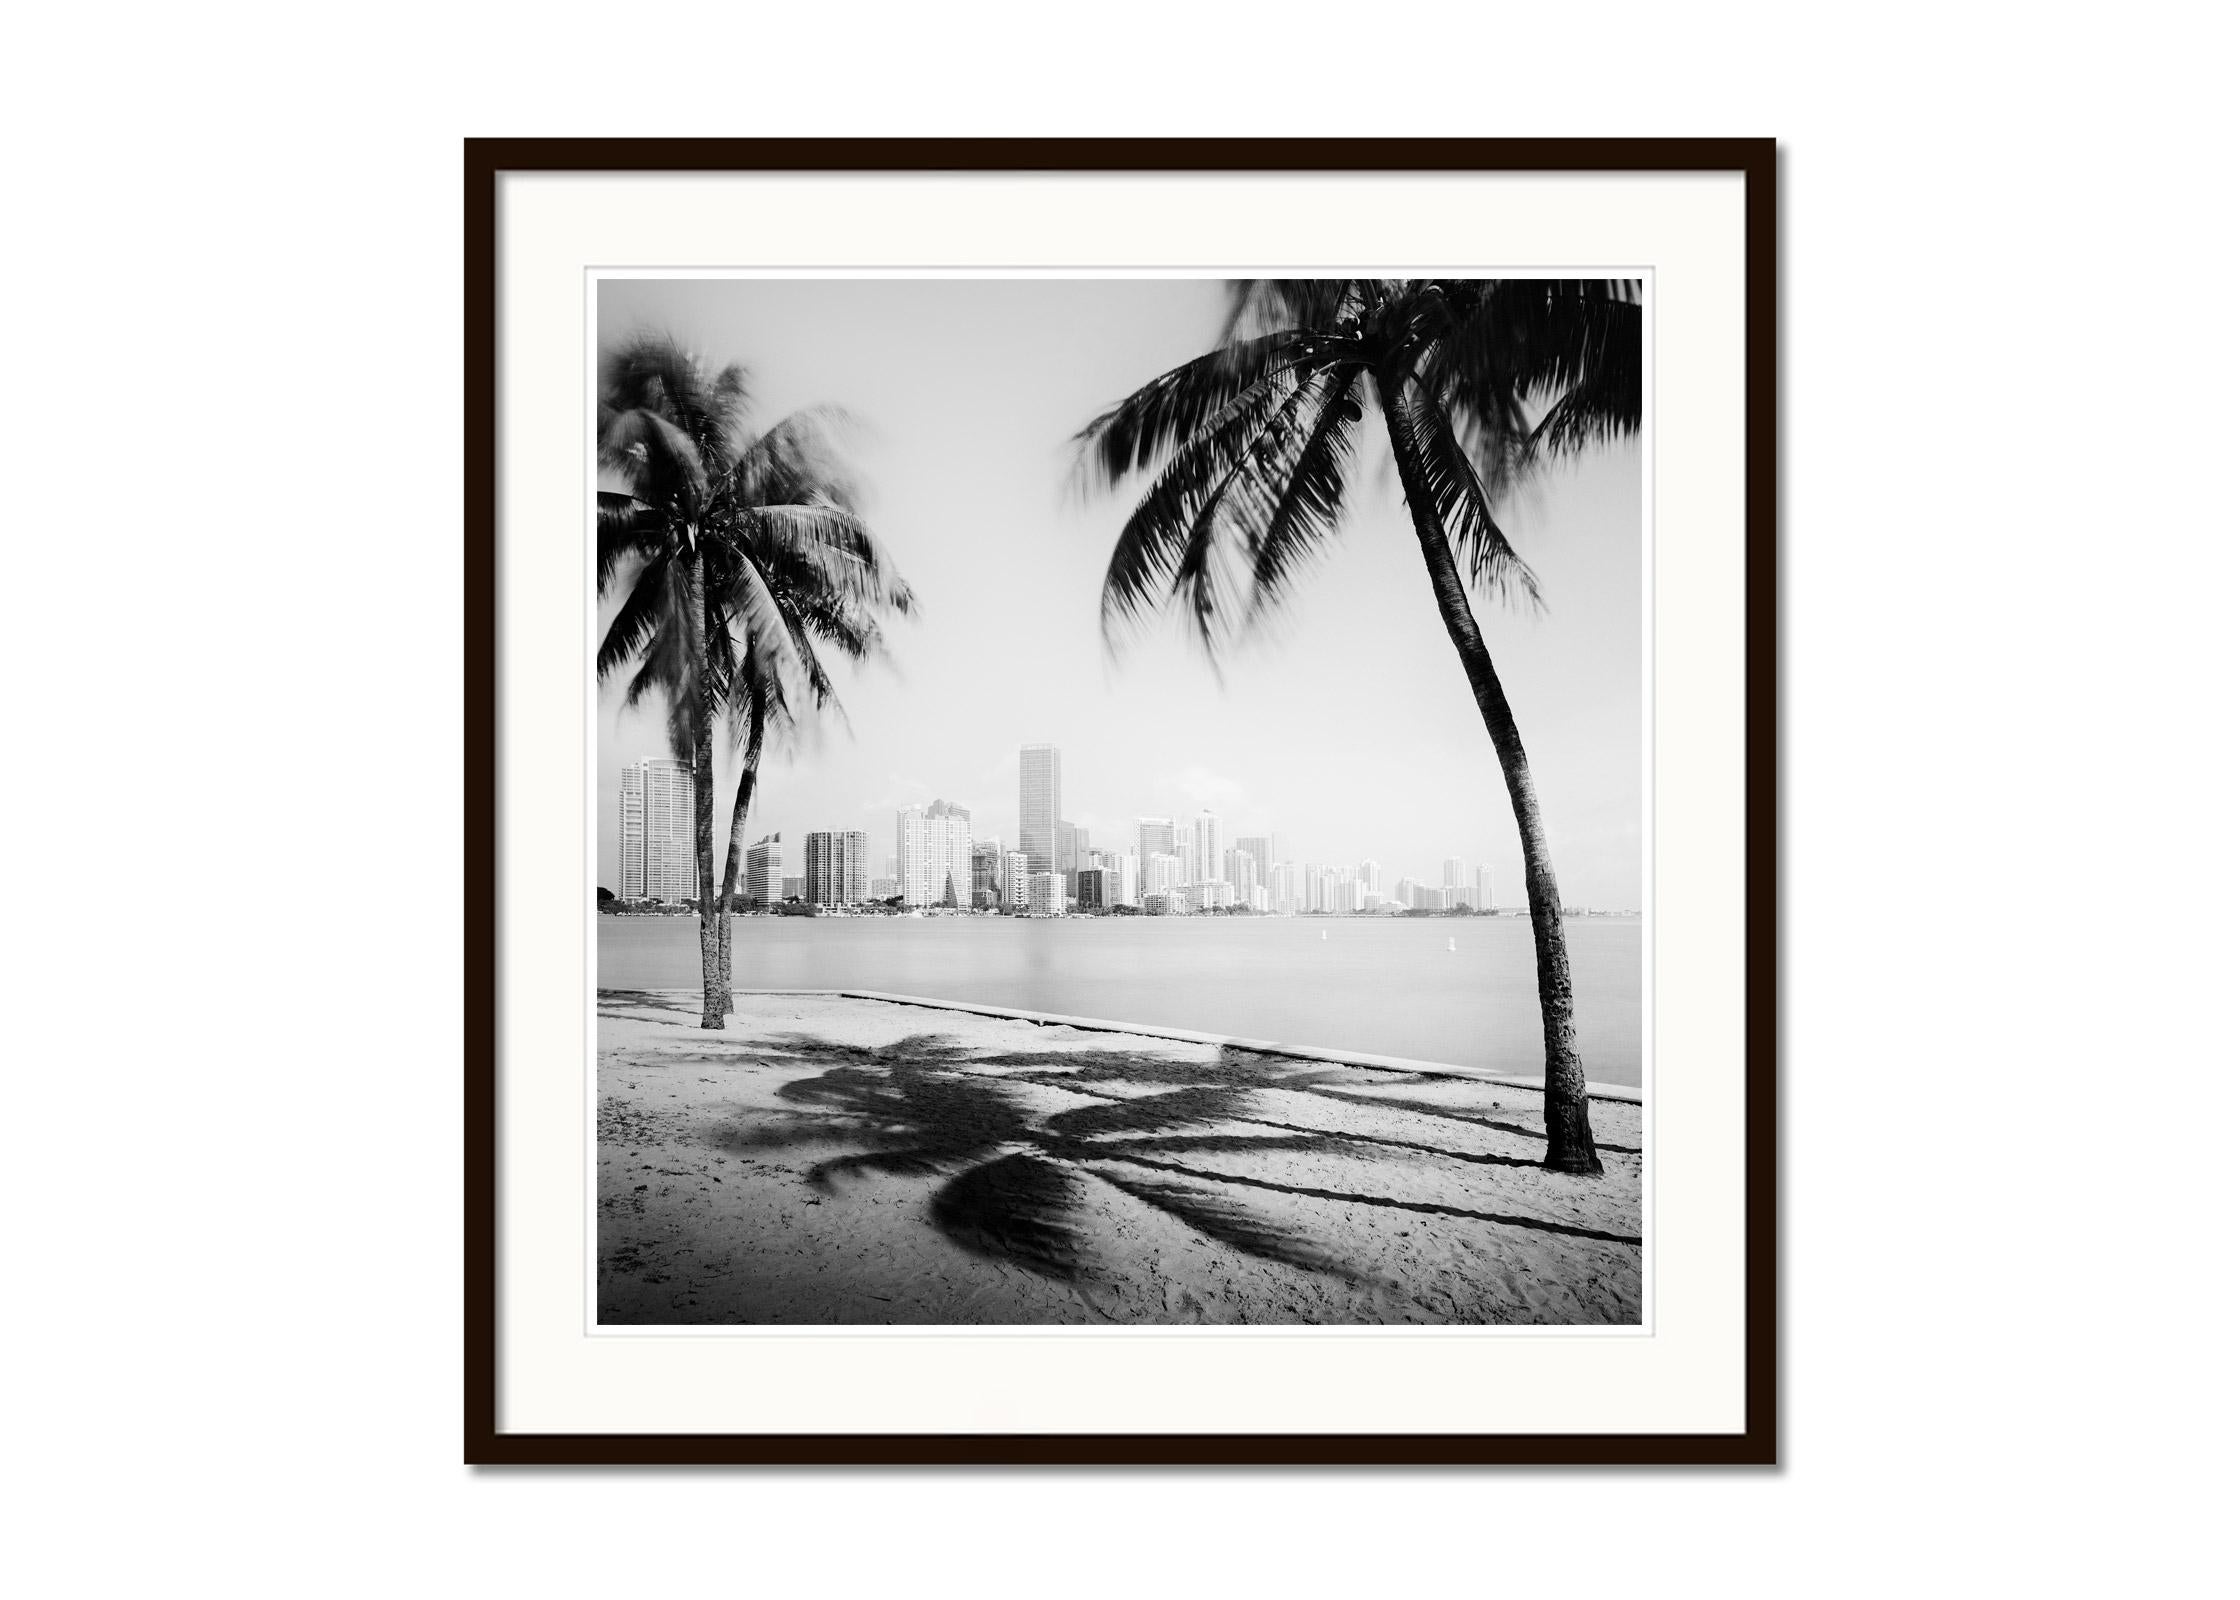 Black and White Fine Art Photography - Miami skyline with palm trees, Florida, USA. Archival pigment ink print, edition of 9. Signed, titled, dated and numbered by artist. Certificate of authenticity included. Printed with 4cm white